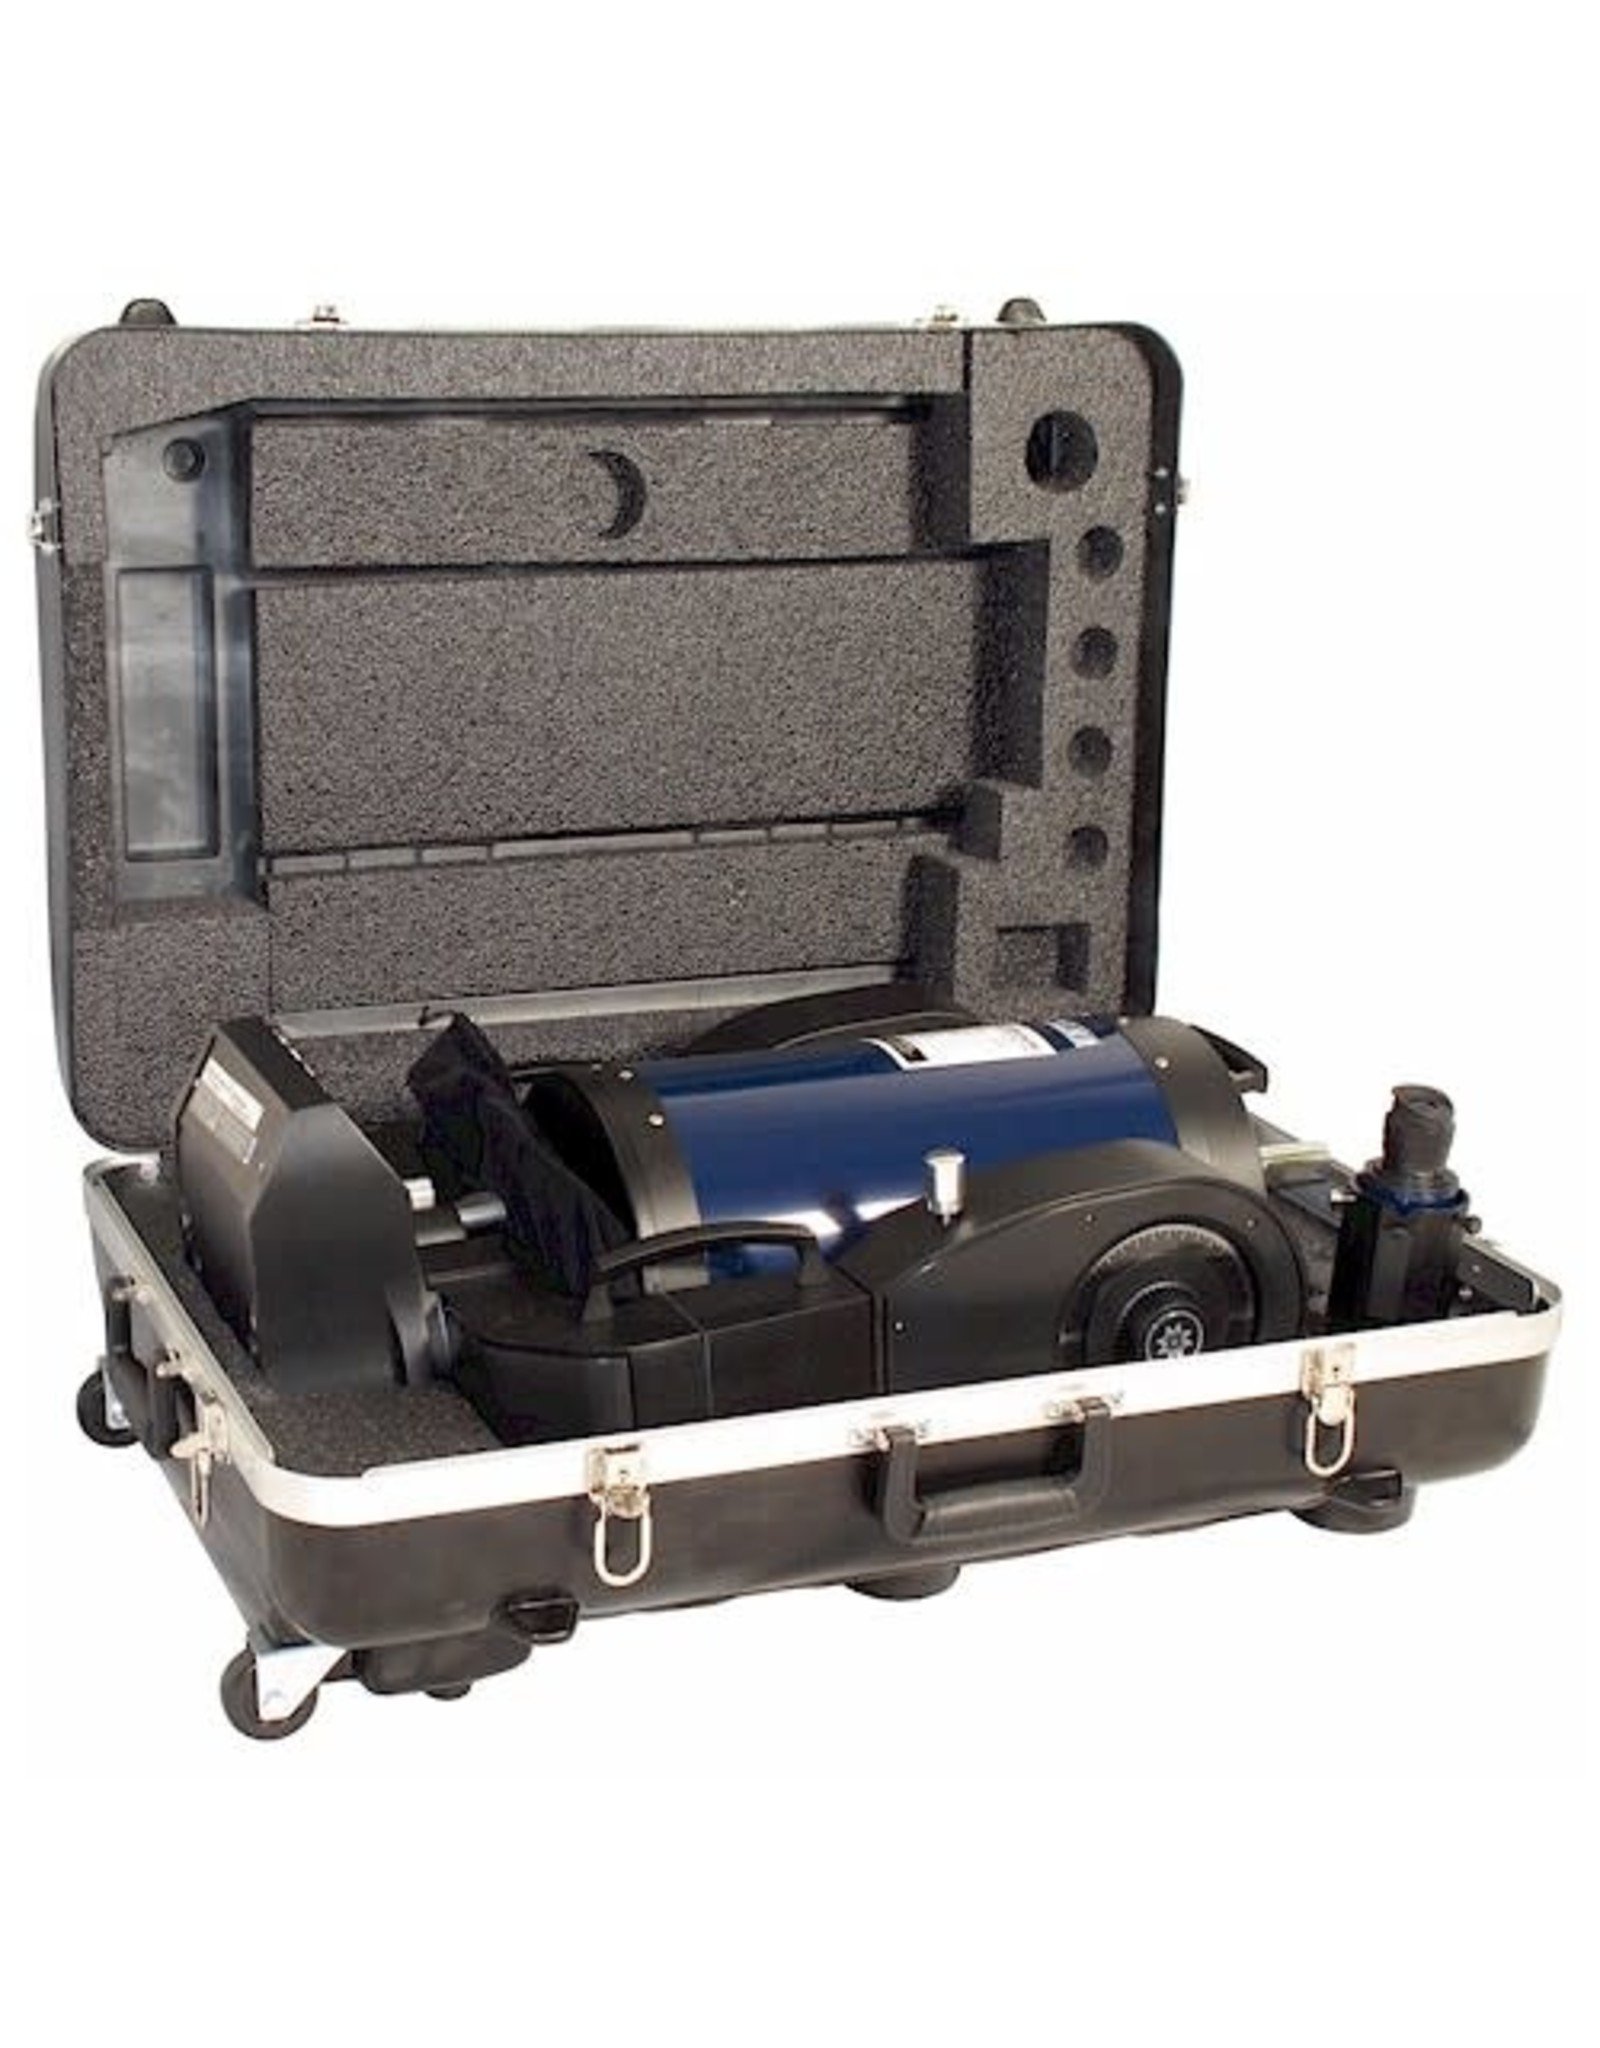 JMI JMI Multi-use Telescope Carrying Case for 8" SCTs with 10" Pneumatic Wheel Option